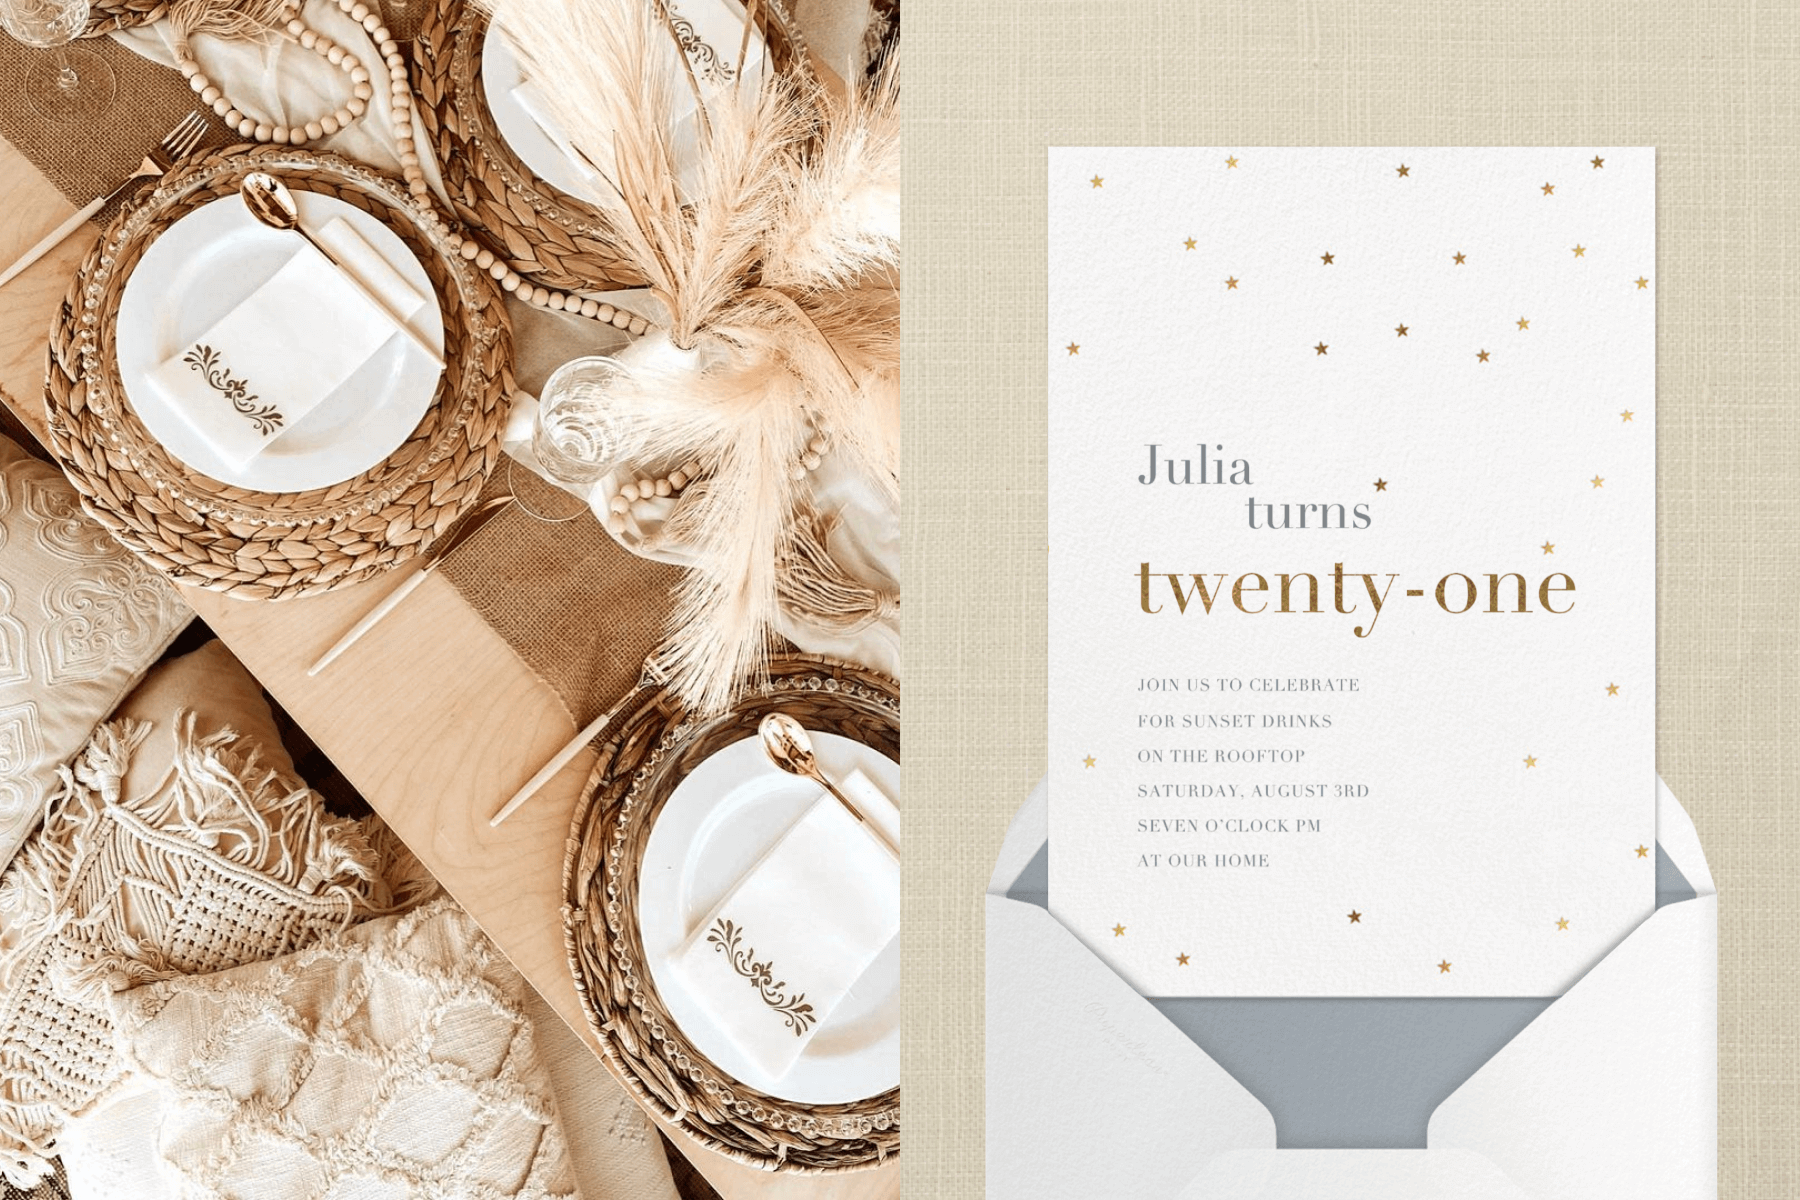 Left: An overhead shot of a boho-chic tabelsetting featuring white plates, rattan chargers, pillows, and pampas grass; Right: A 21st birthday invitation with tiny gold stars.